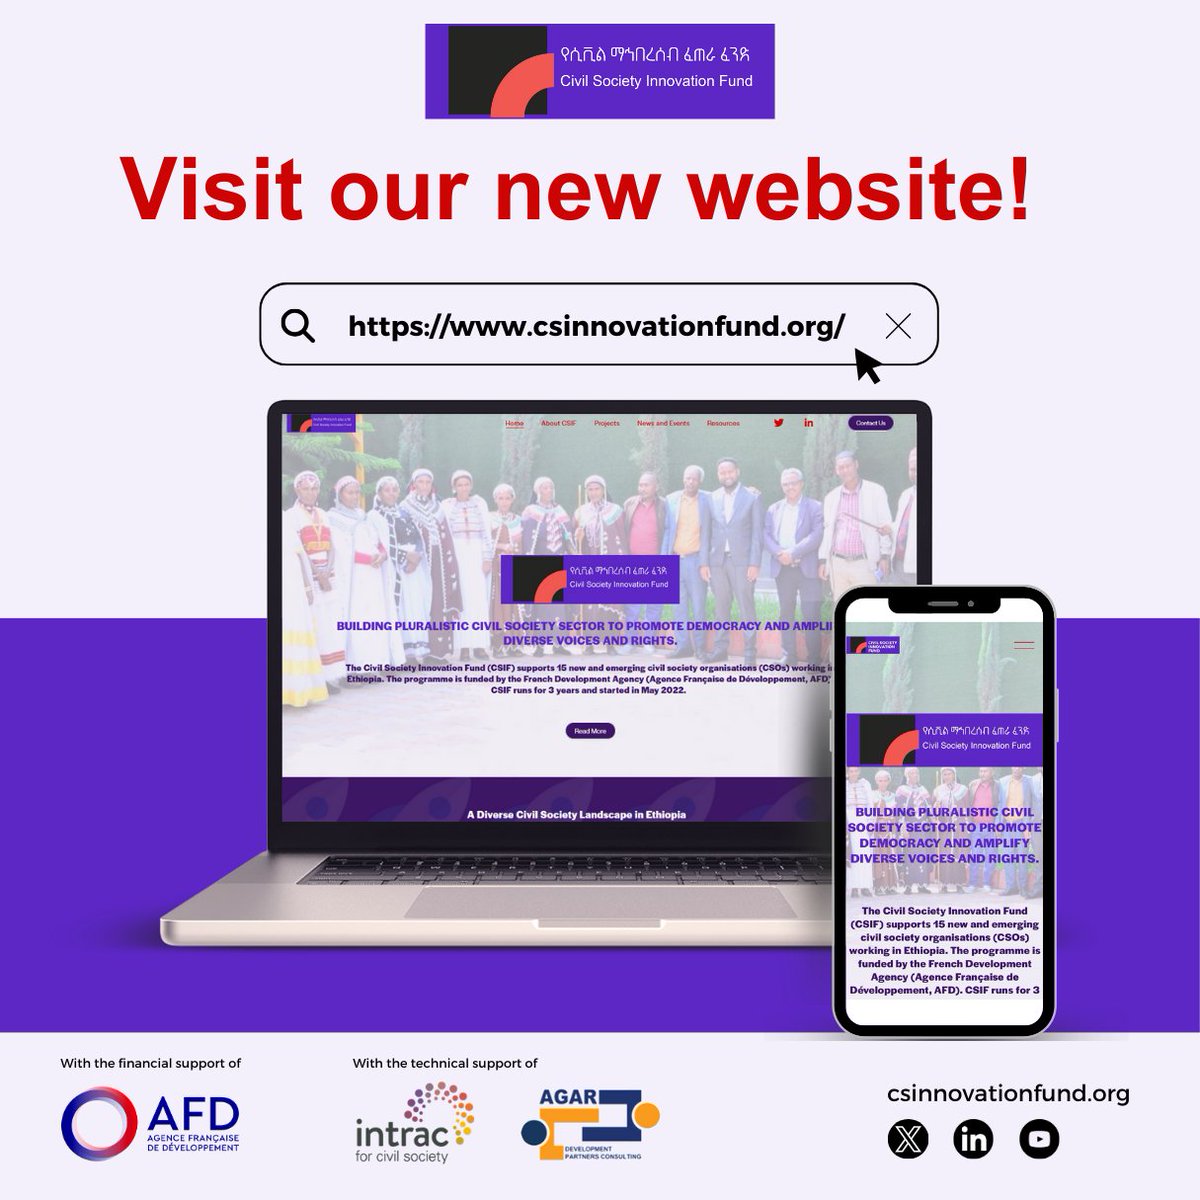 🌐We’re excited to announce that our new #website csinnovationfund.org is live! 🚀 Follow our channels and join our mailing list to stay connected and up to date on the latest news and announcements about the #CSIFEthiopia work!